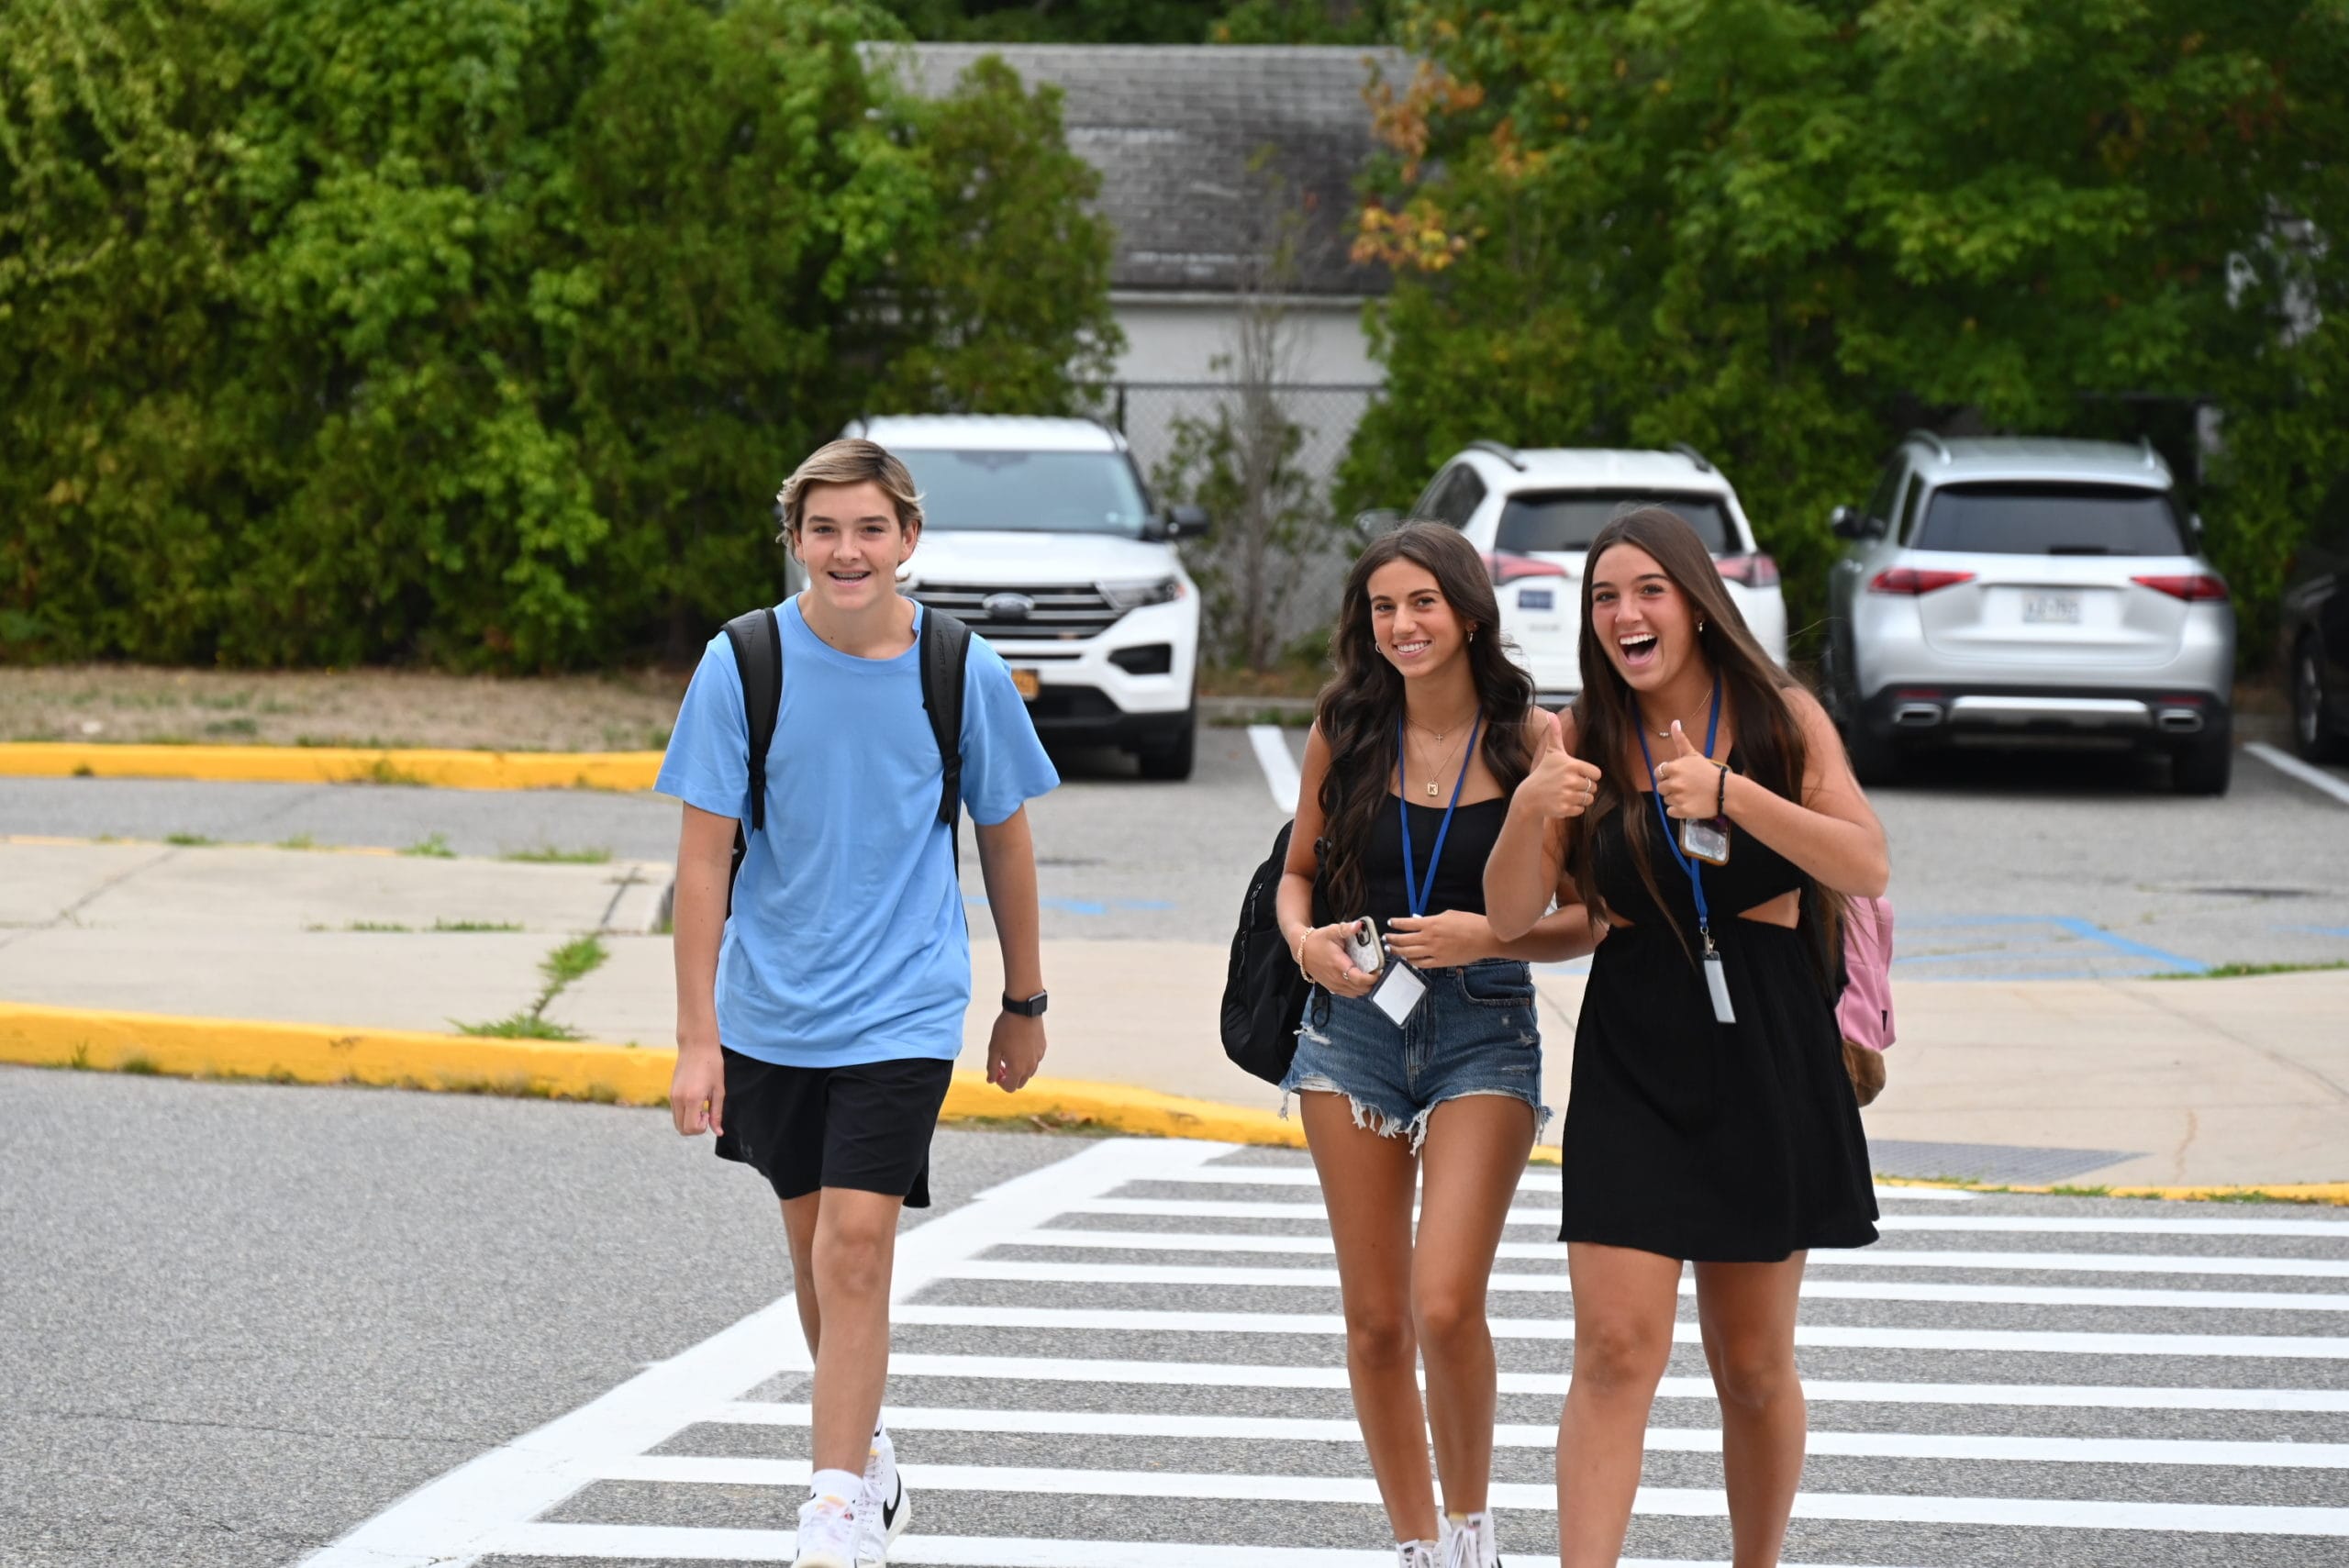 Warms Wishes For A New School Year In West Islip